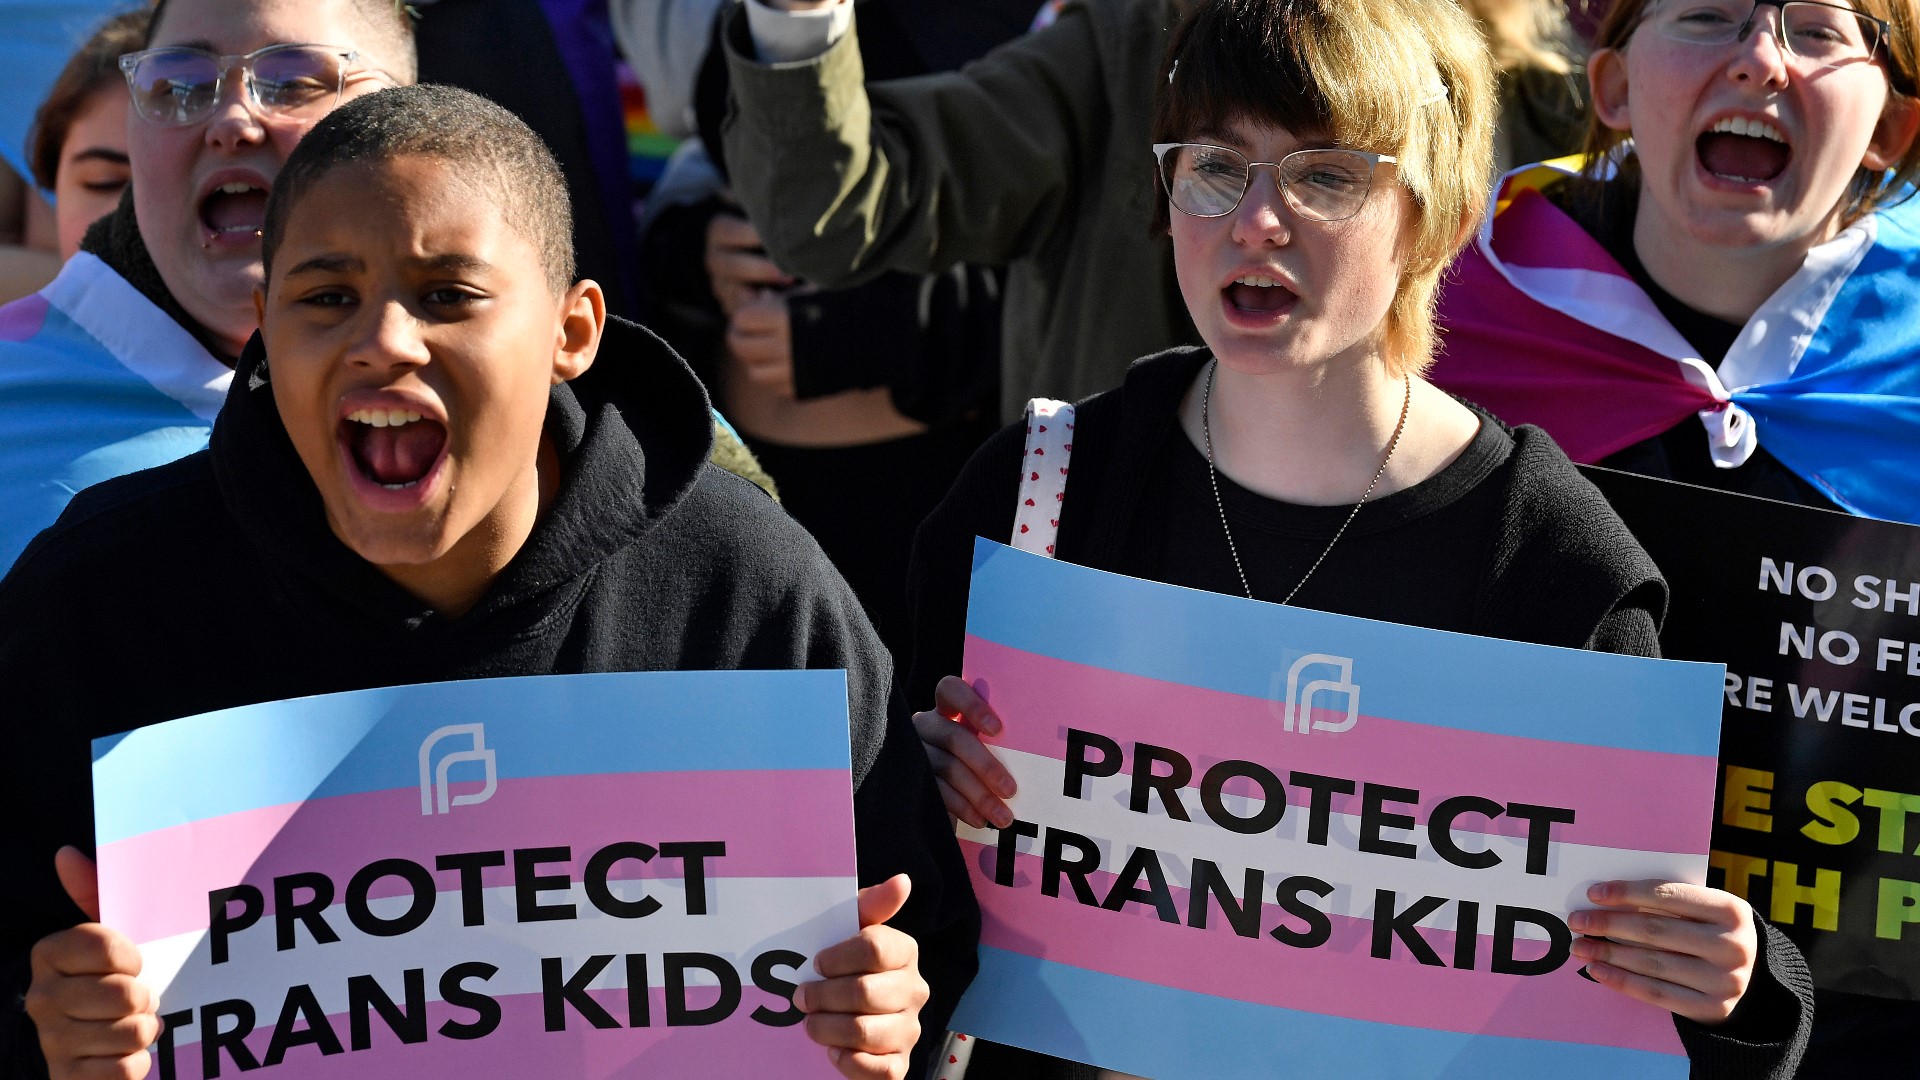 The part of Senate Bill 150 banning gender-affirming care for trans youth in Kentucky goes into effect on June 29, 2023.